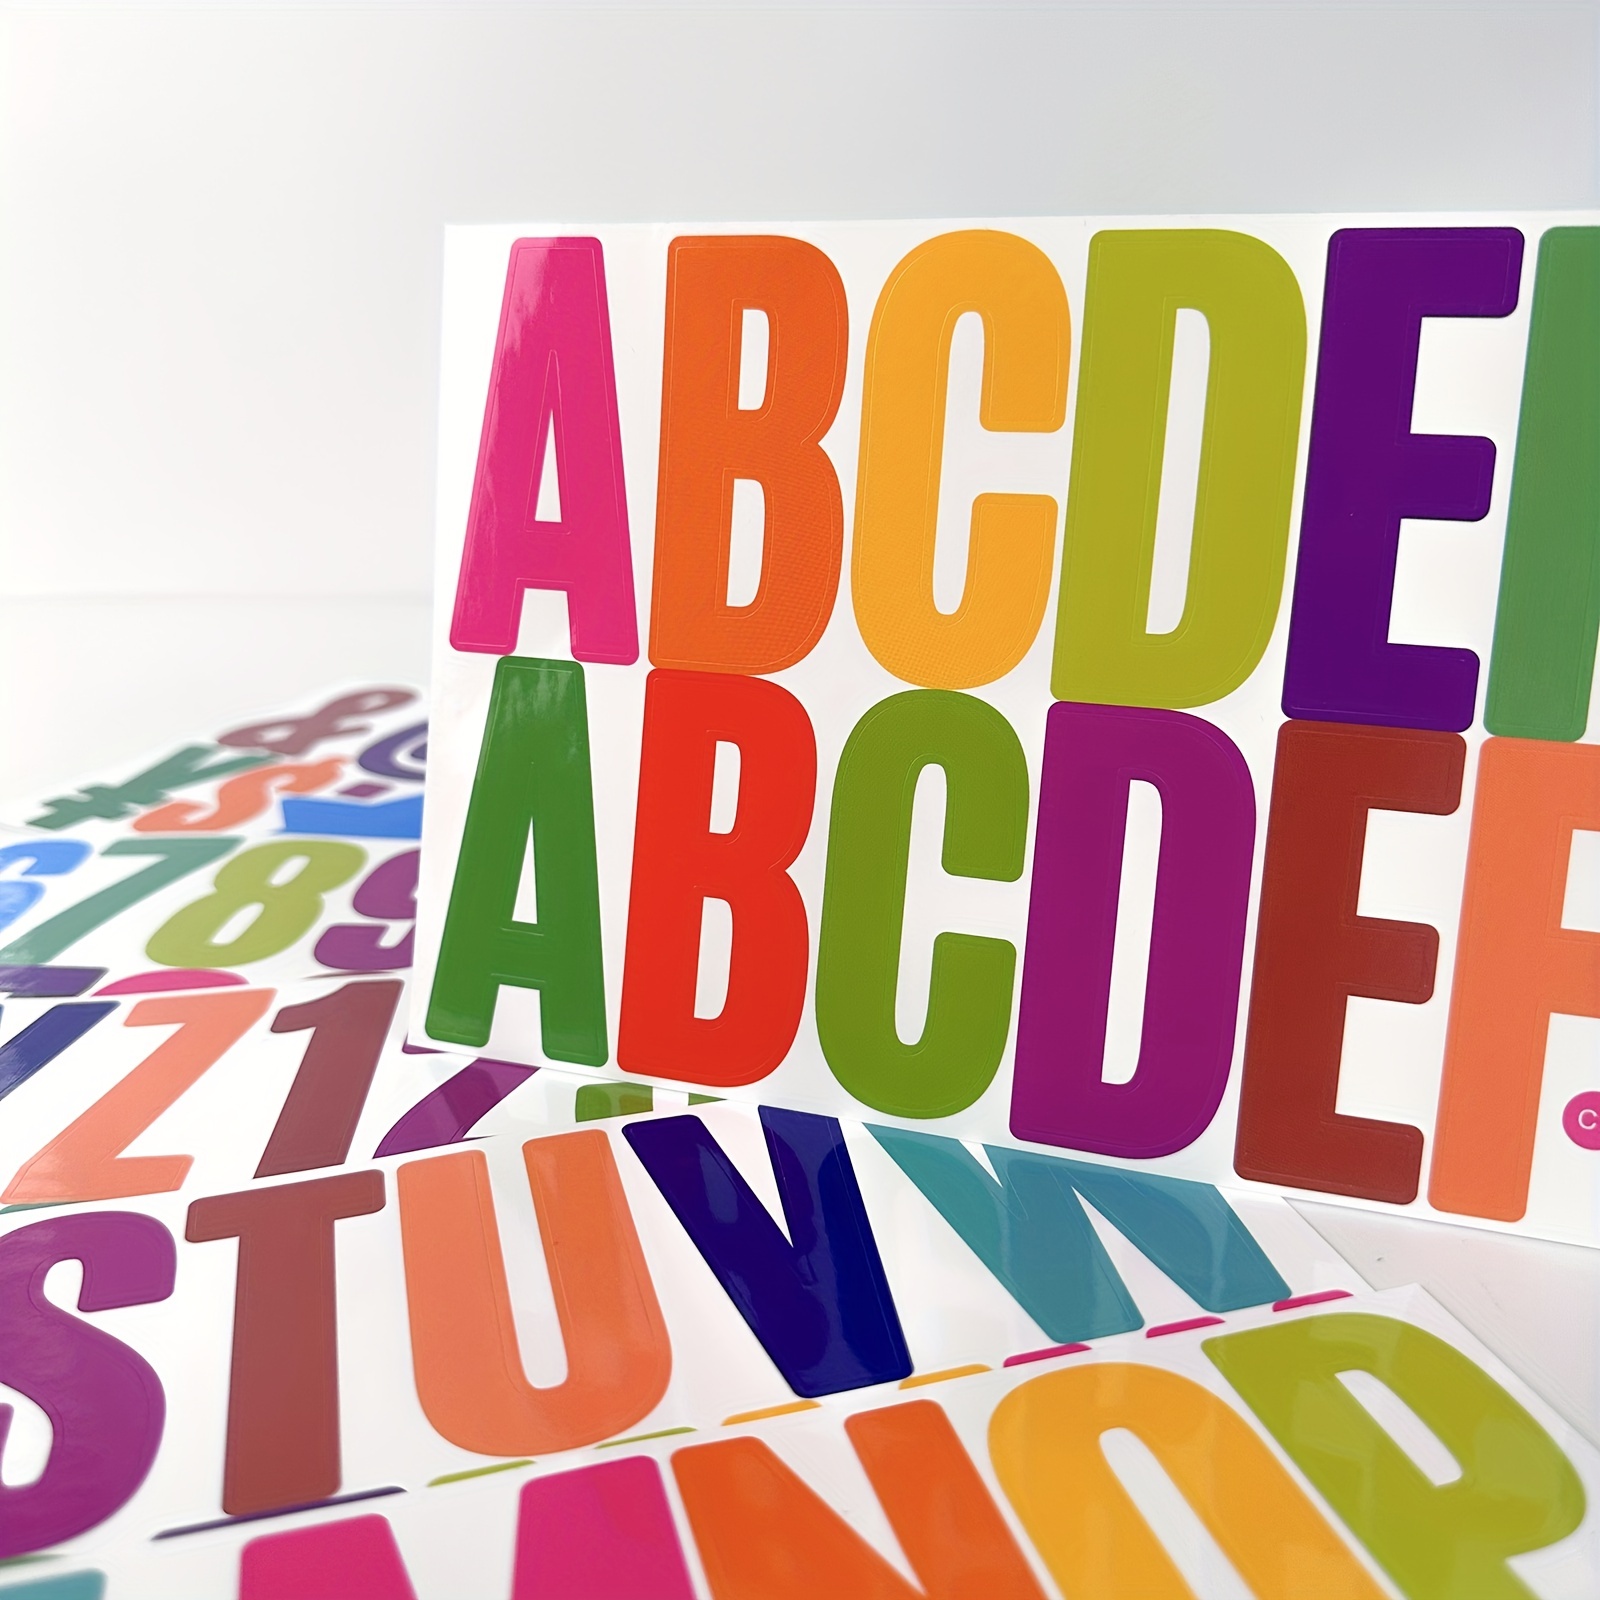 260 Pcs Large Letter Stickers 2.5 Inch Self Adhesive Big Font Alphabet  Letter Stickers Classroom Bulletin Board Poster Mailbox Stickers for  Mailbox